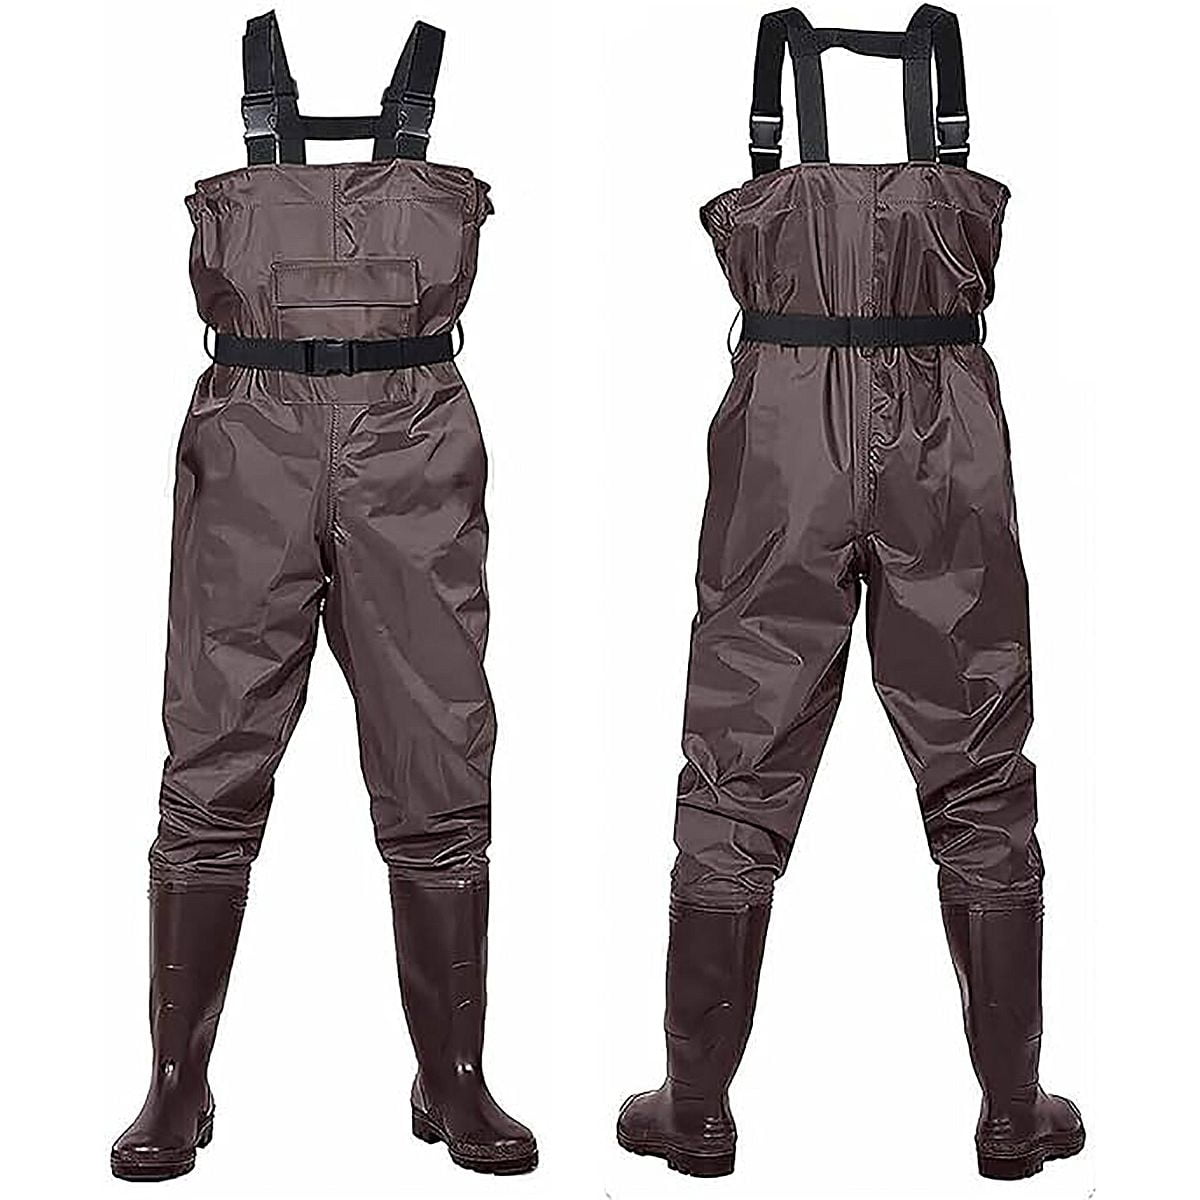 Guide Gear Mens Hunting Chest Waders with Boots, Big and Tall